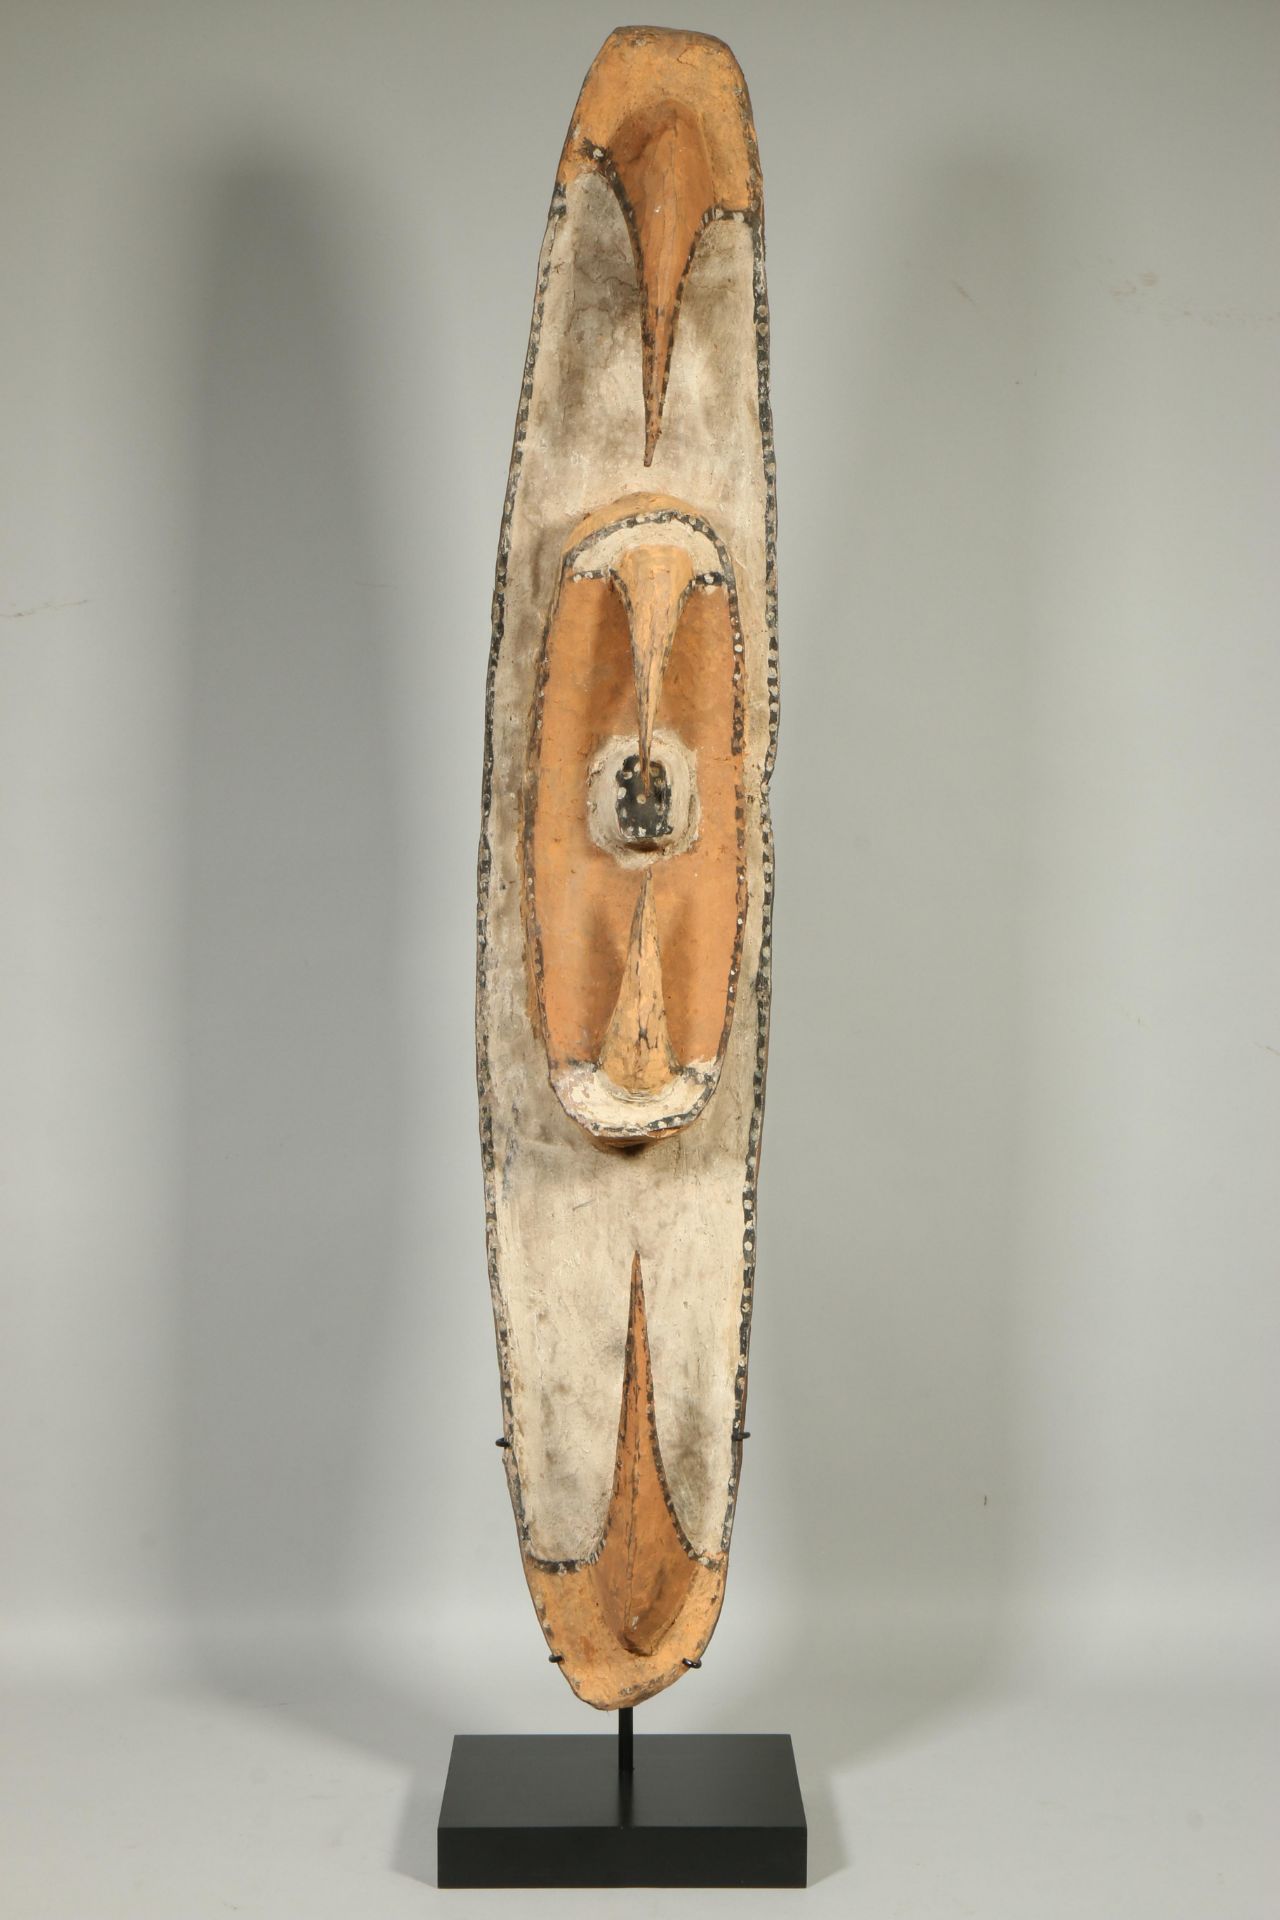 P.N. Guinea, Hunstein Mountains, a oval mask, garra - Image 4 of 4